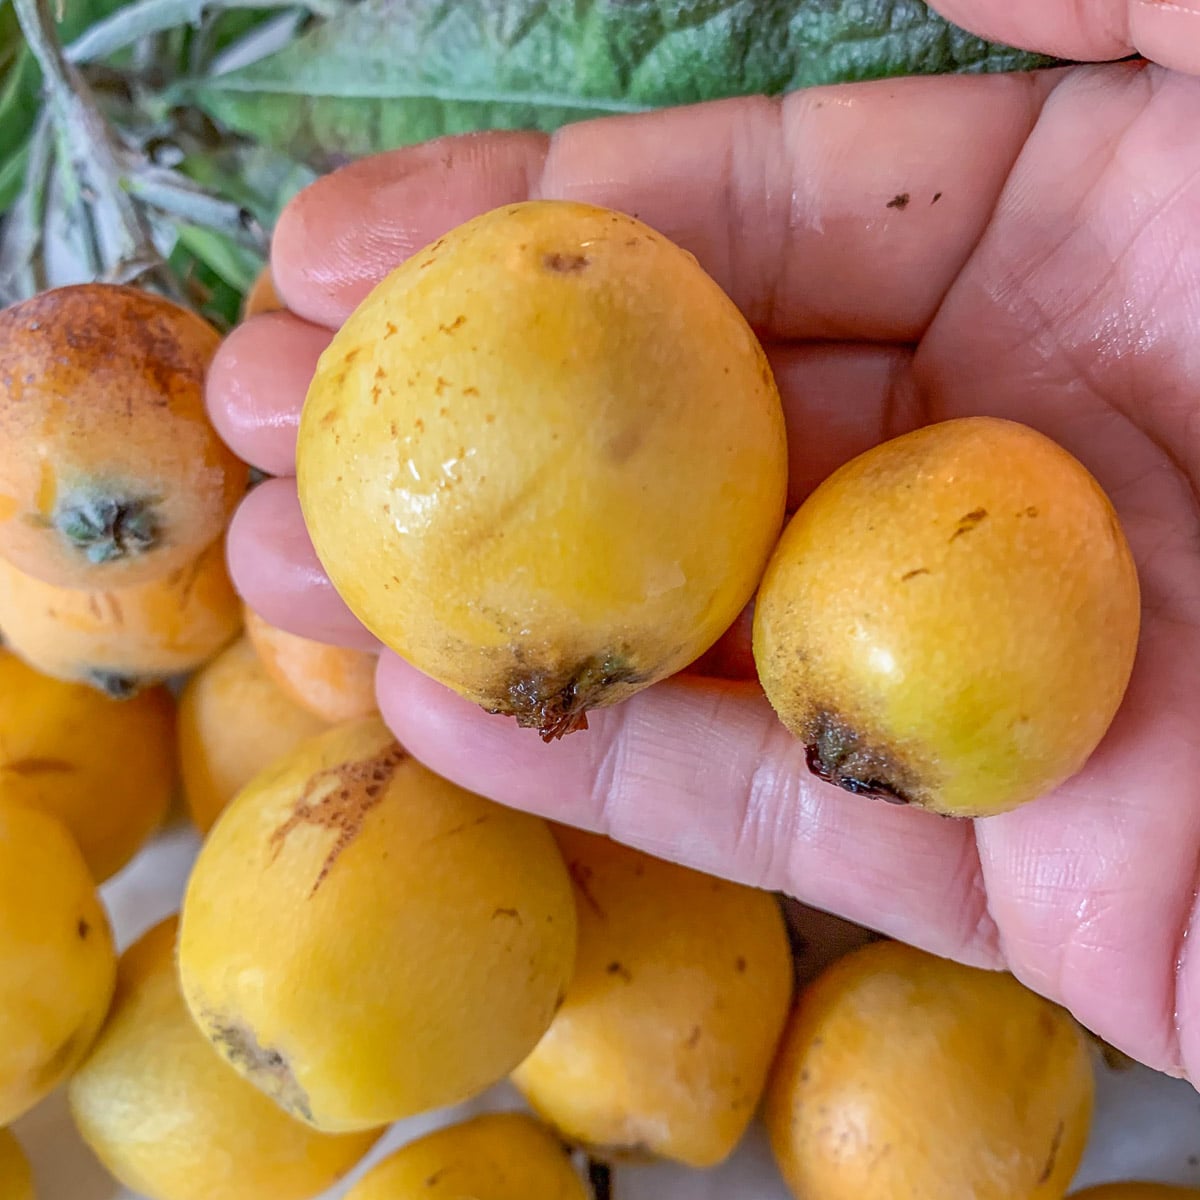 2 loquats in a hand being held up over more loquats